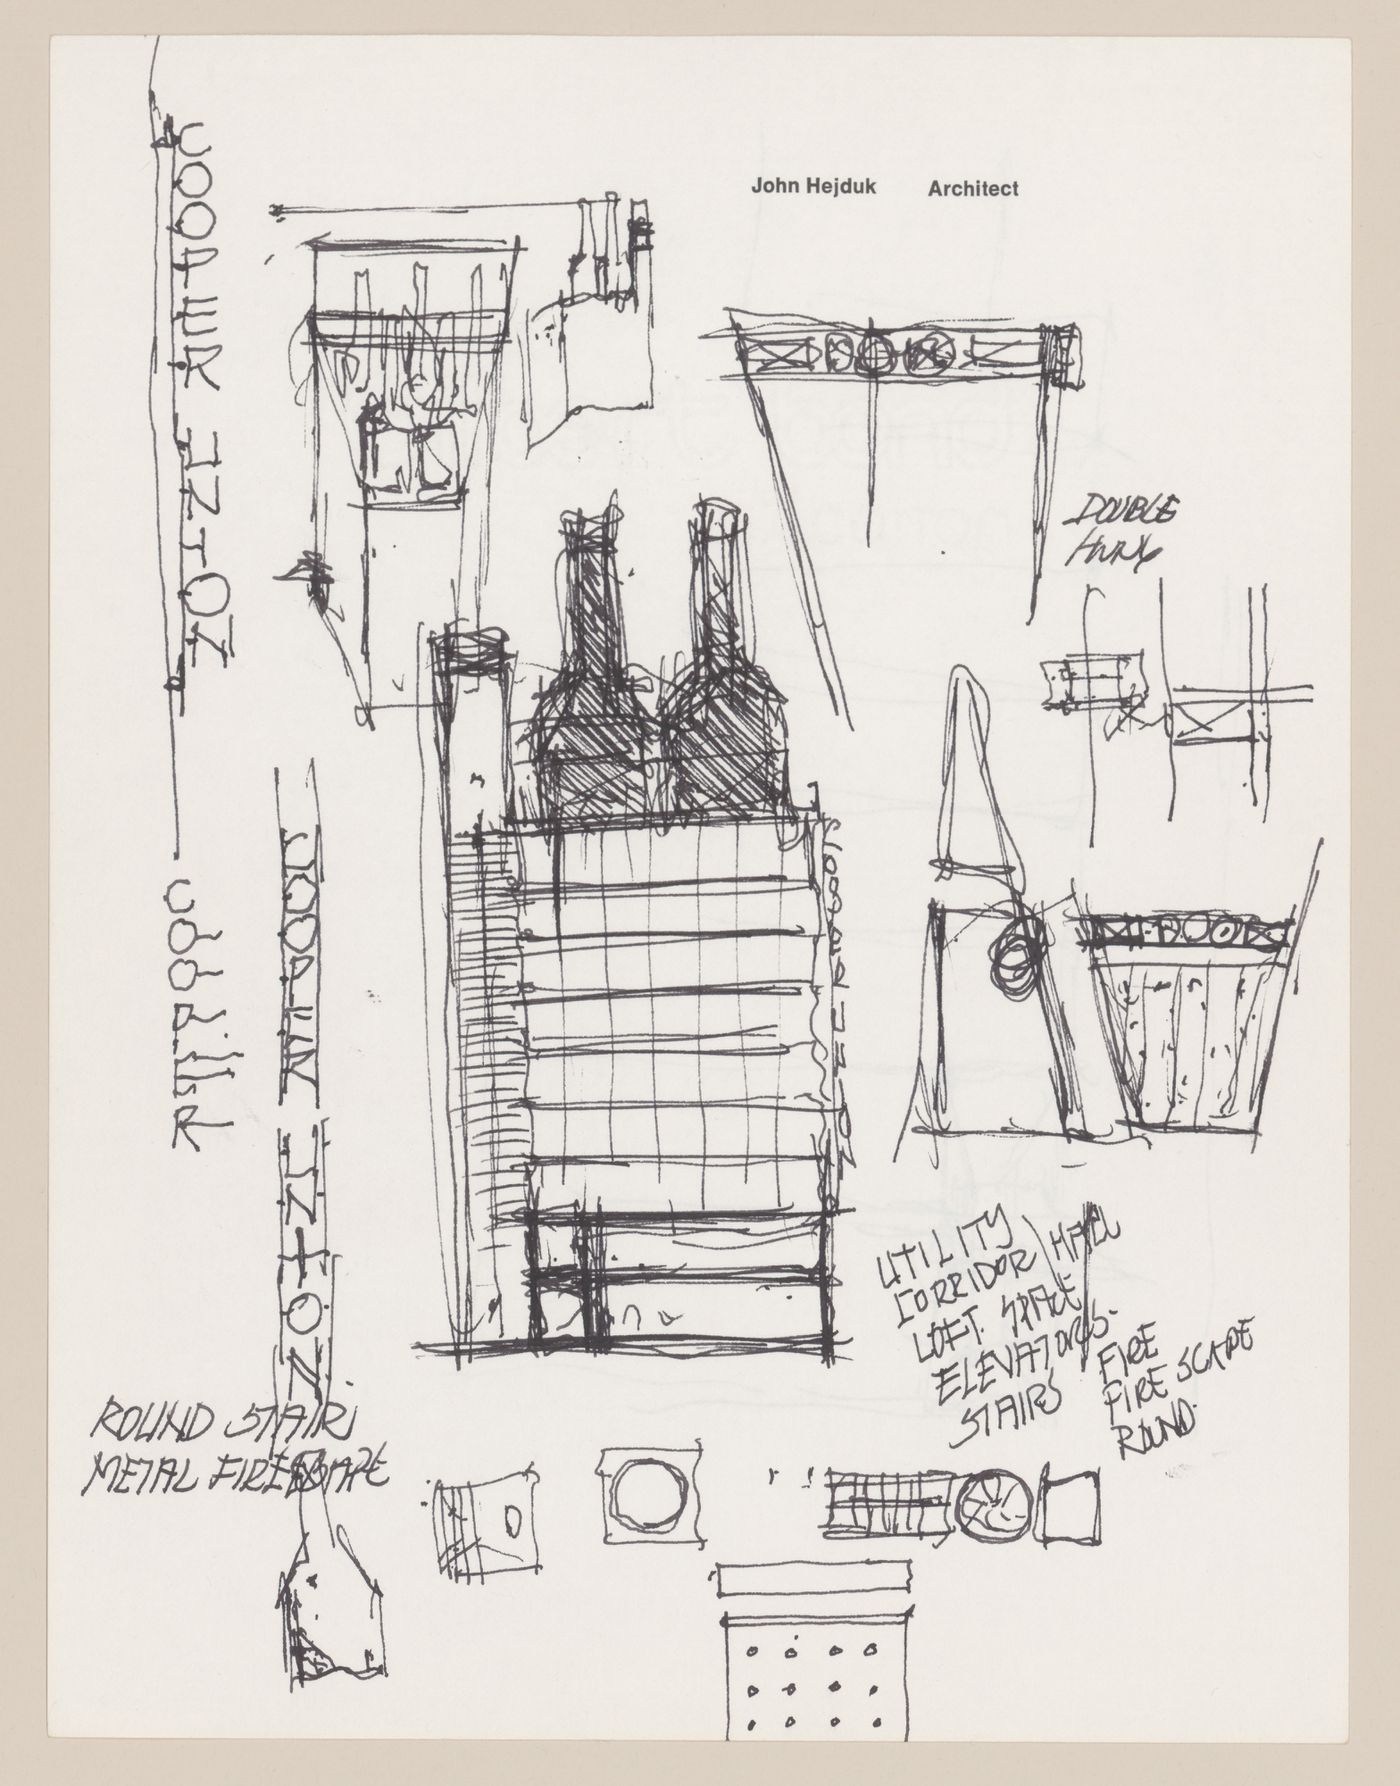 Sketches and notes for Cooper Union Foundation Building Renovation